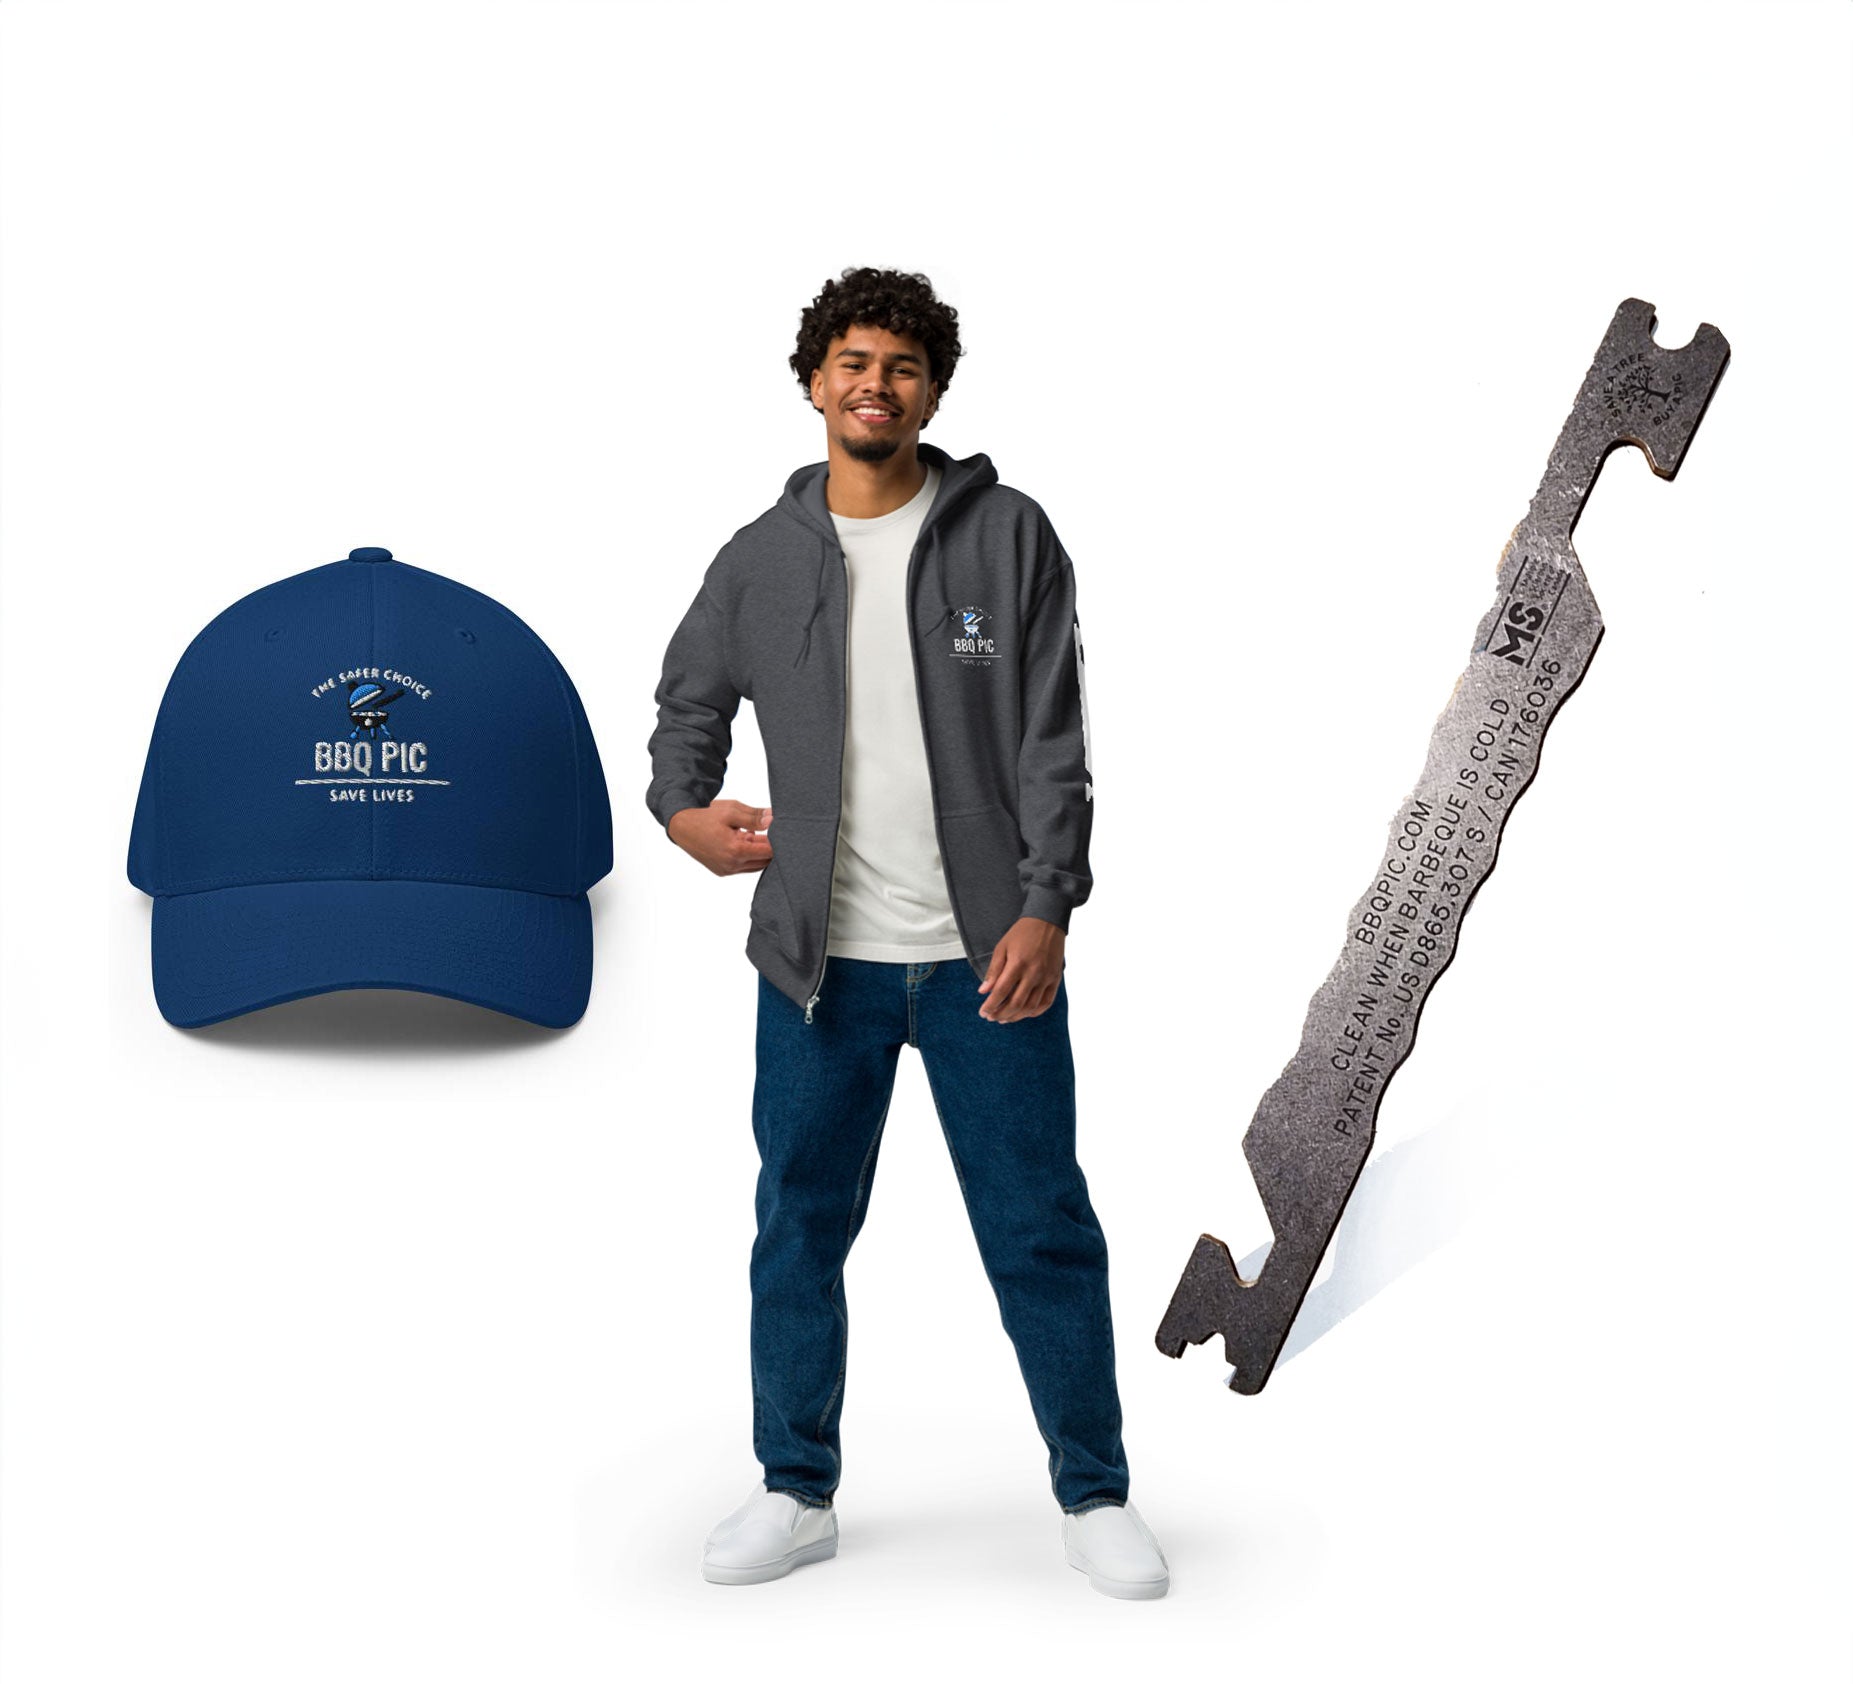 Image of the BBQ Pic Bundle where you save money which includes a BBQ Pic hat, Hoody and BBQ Pic Grill Scraper. Hoodie is Heather Grey.